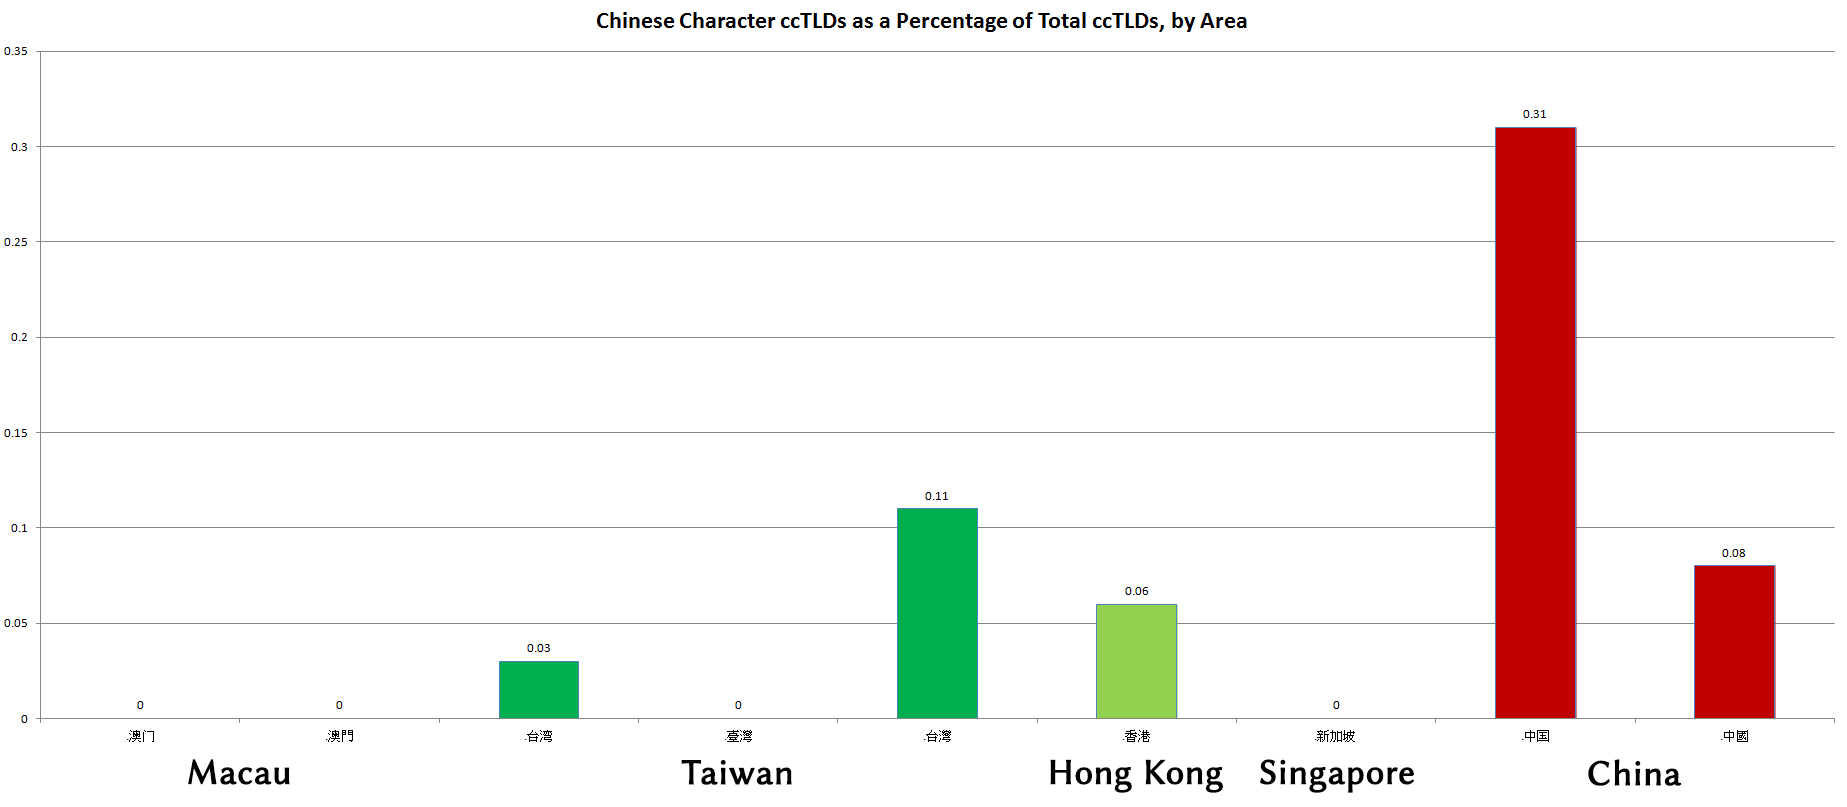 Graph showing that although China leads in domains in Chinese characters, they do not reach even one half of one percent of the total for China